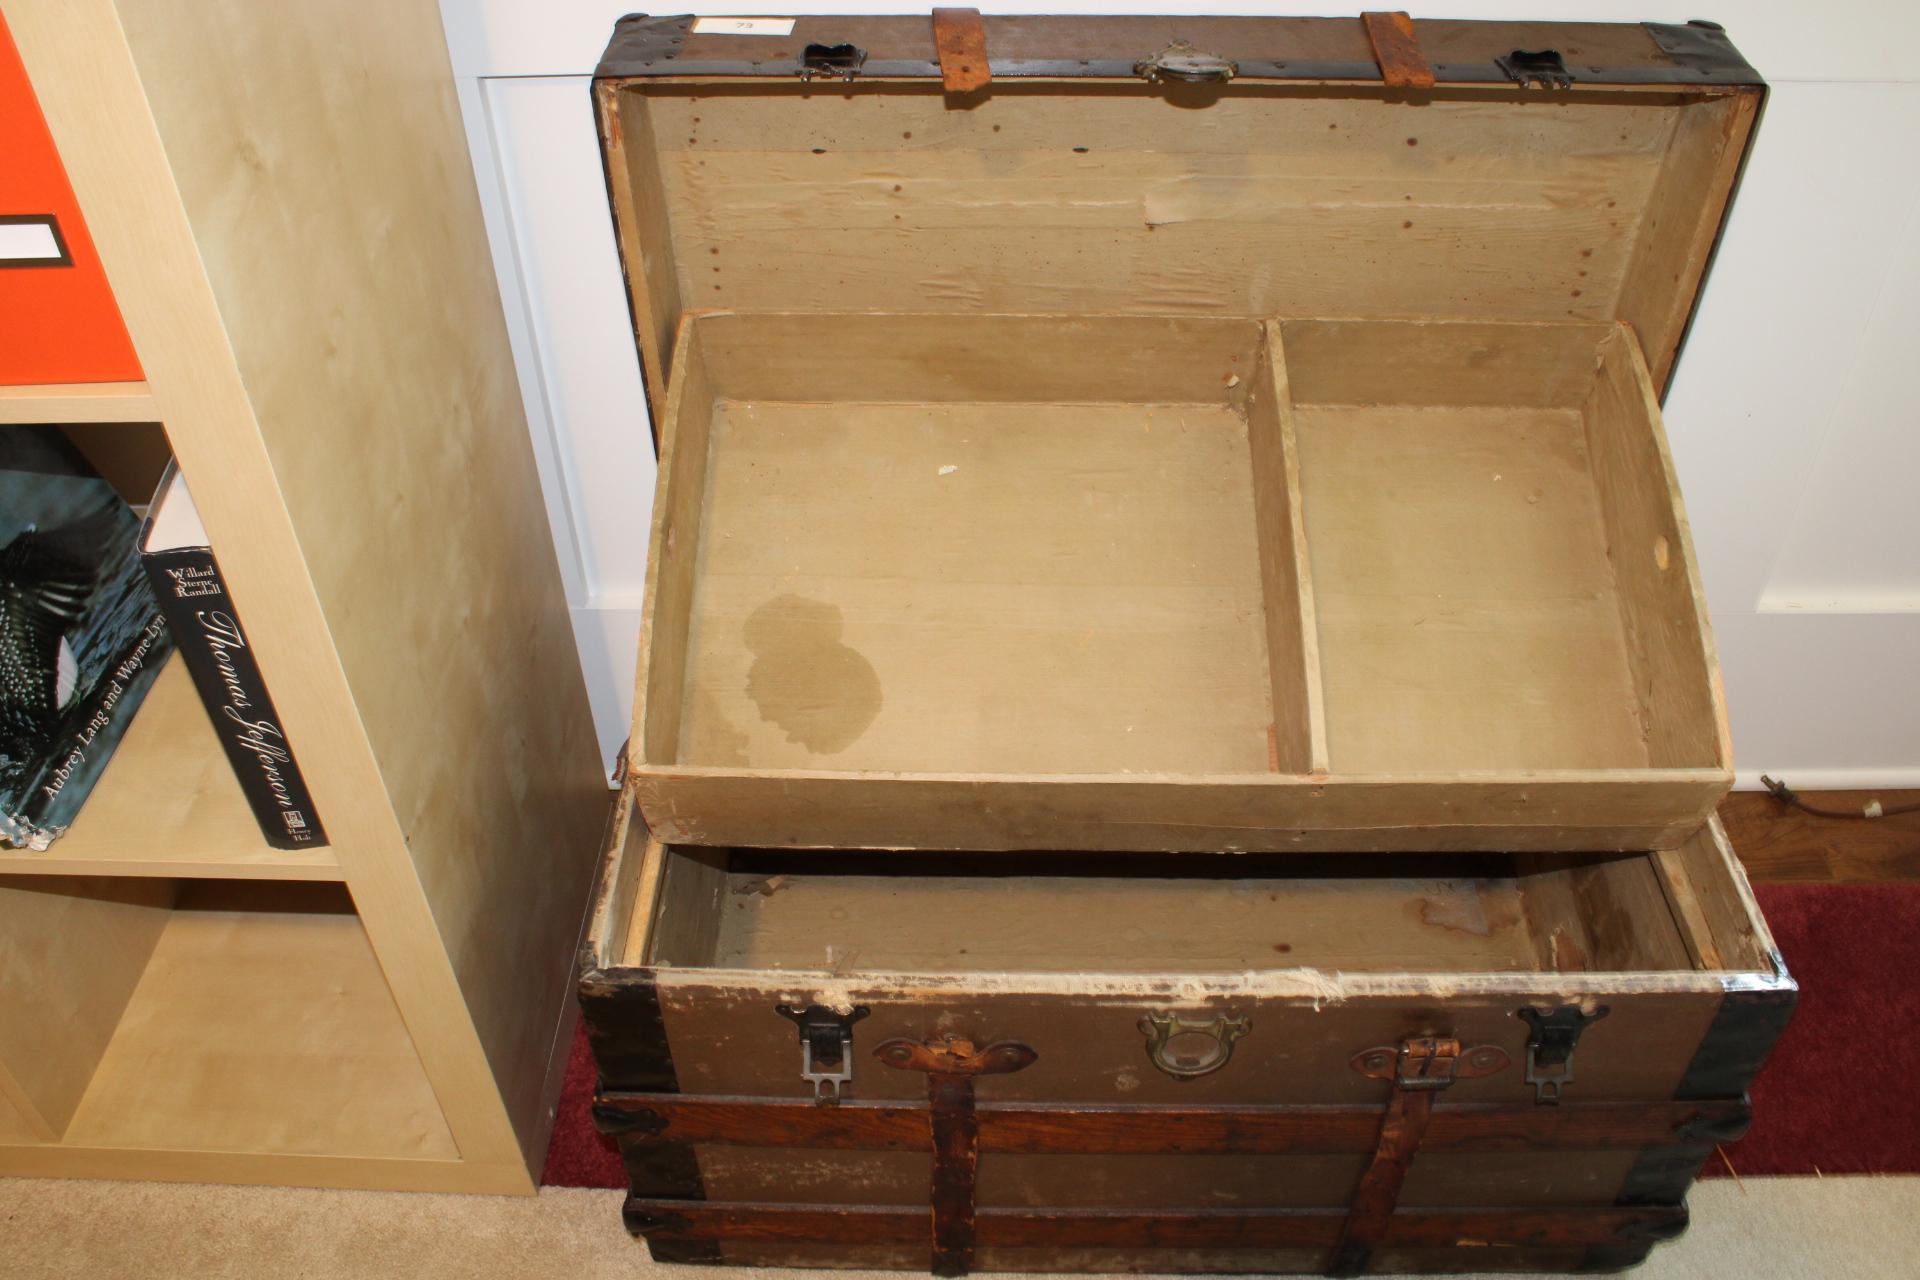 Vintage Yale and Towne Manufacturing Co., Wooden Chest with leather straps. Includes insert organize